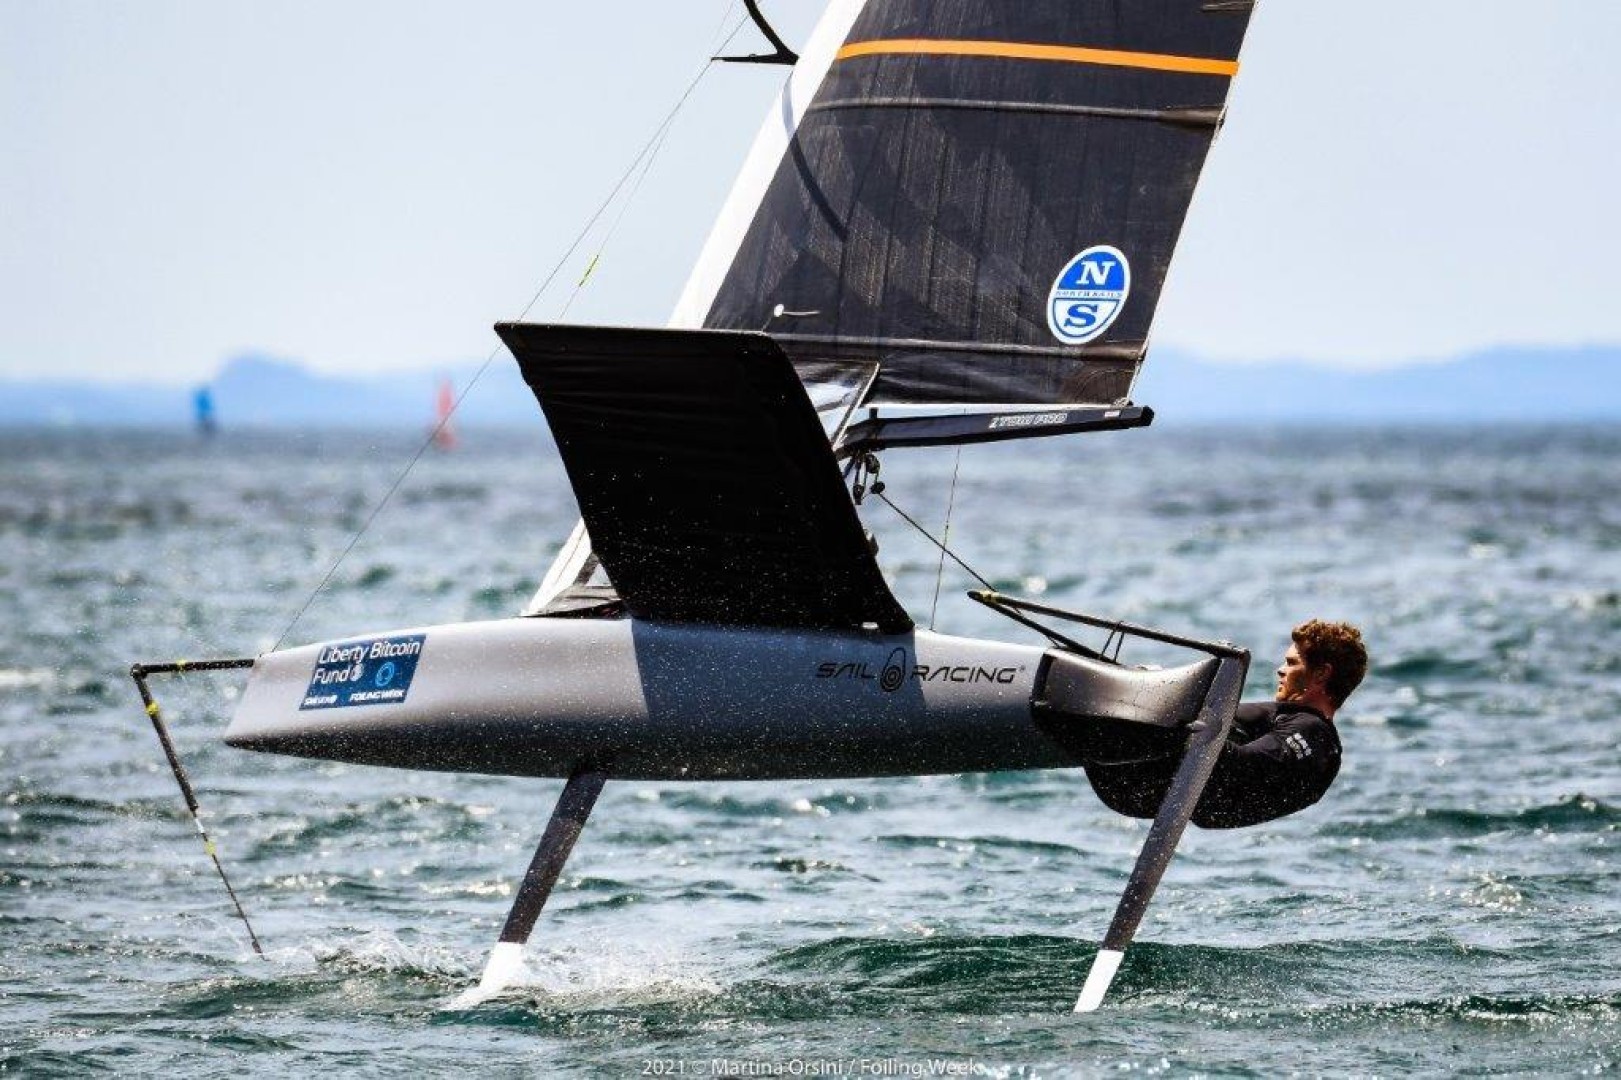 From June 30 to July 3 on Lake Garda will host the Foiling Week